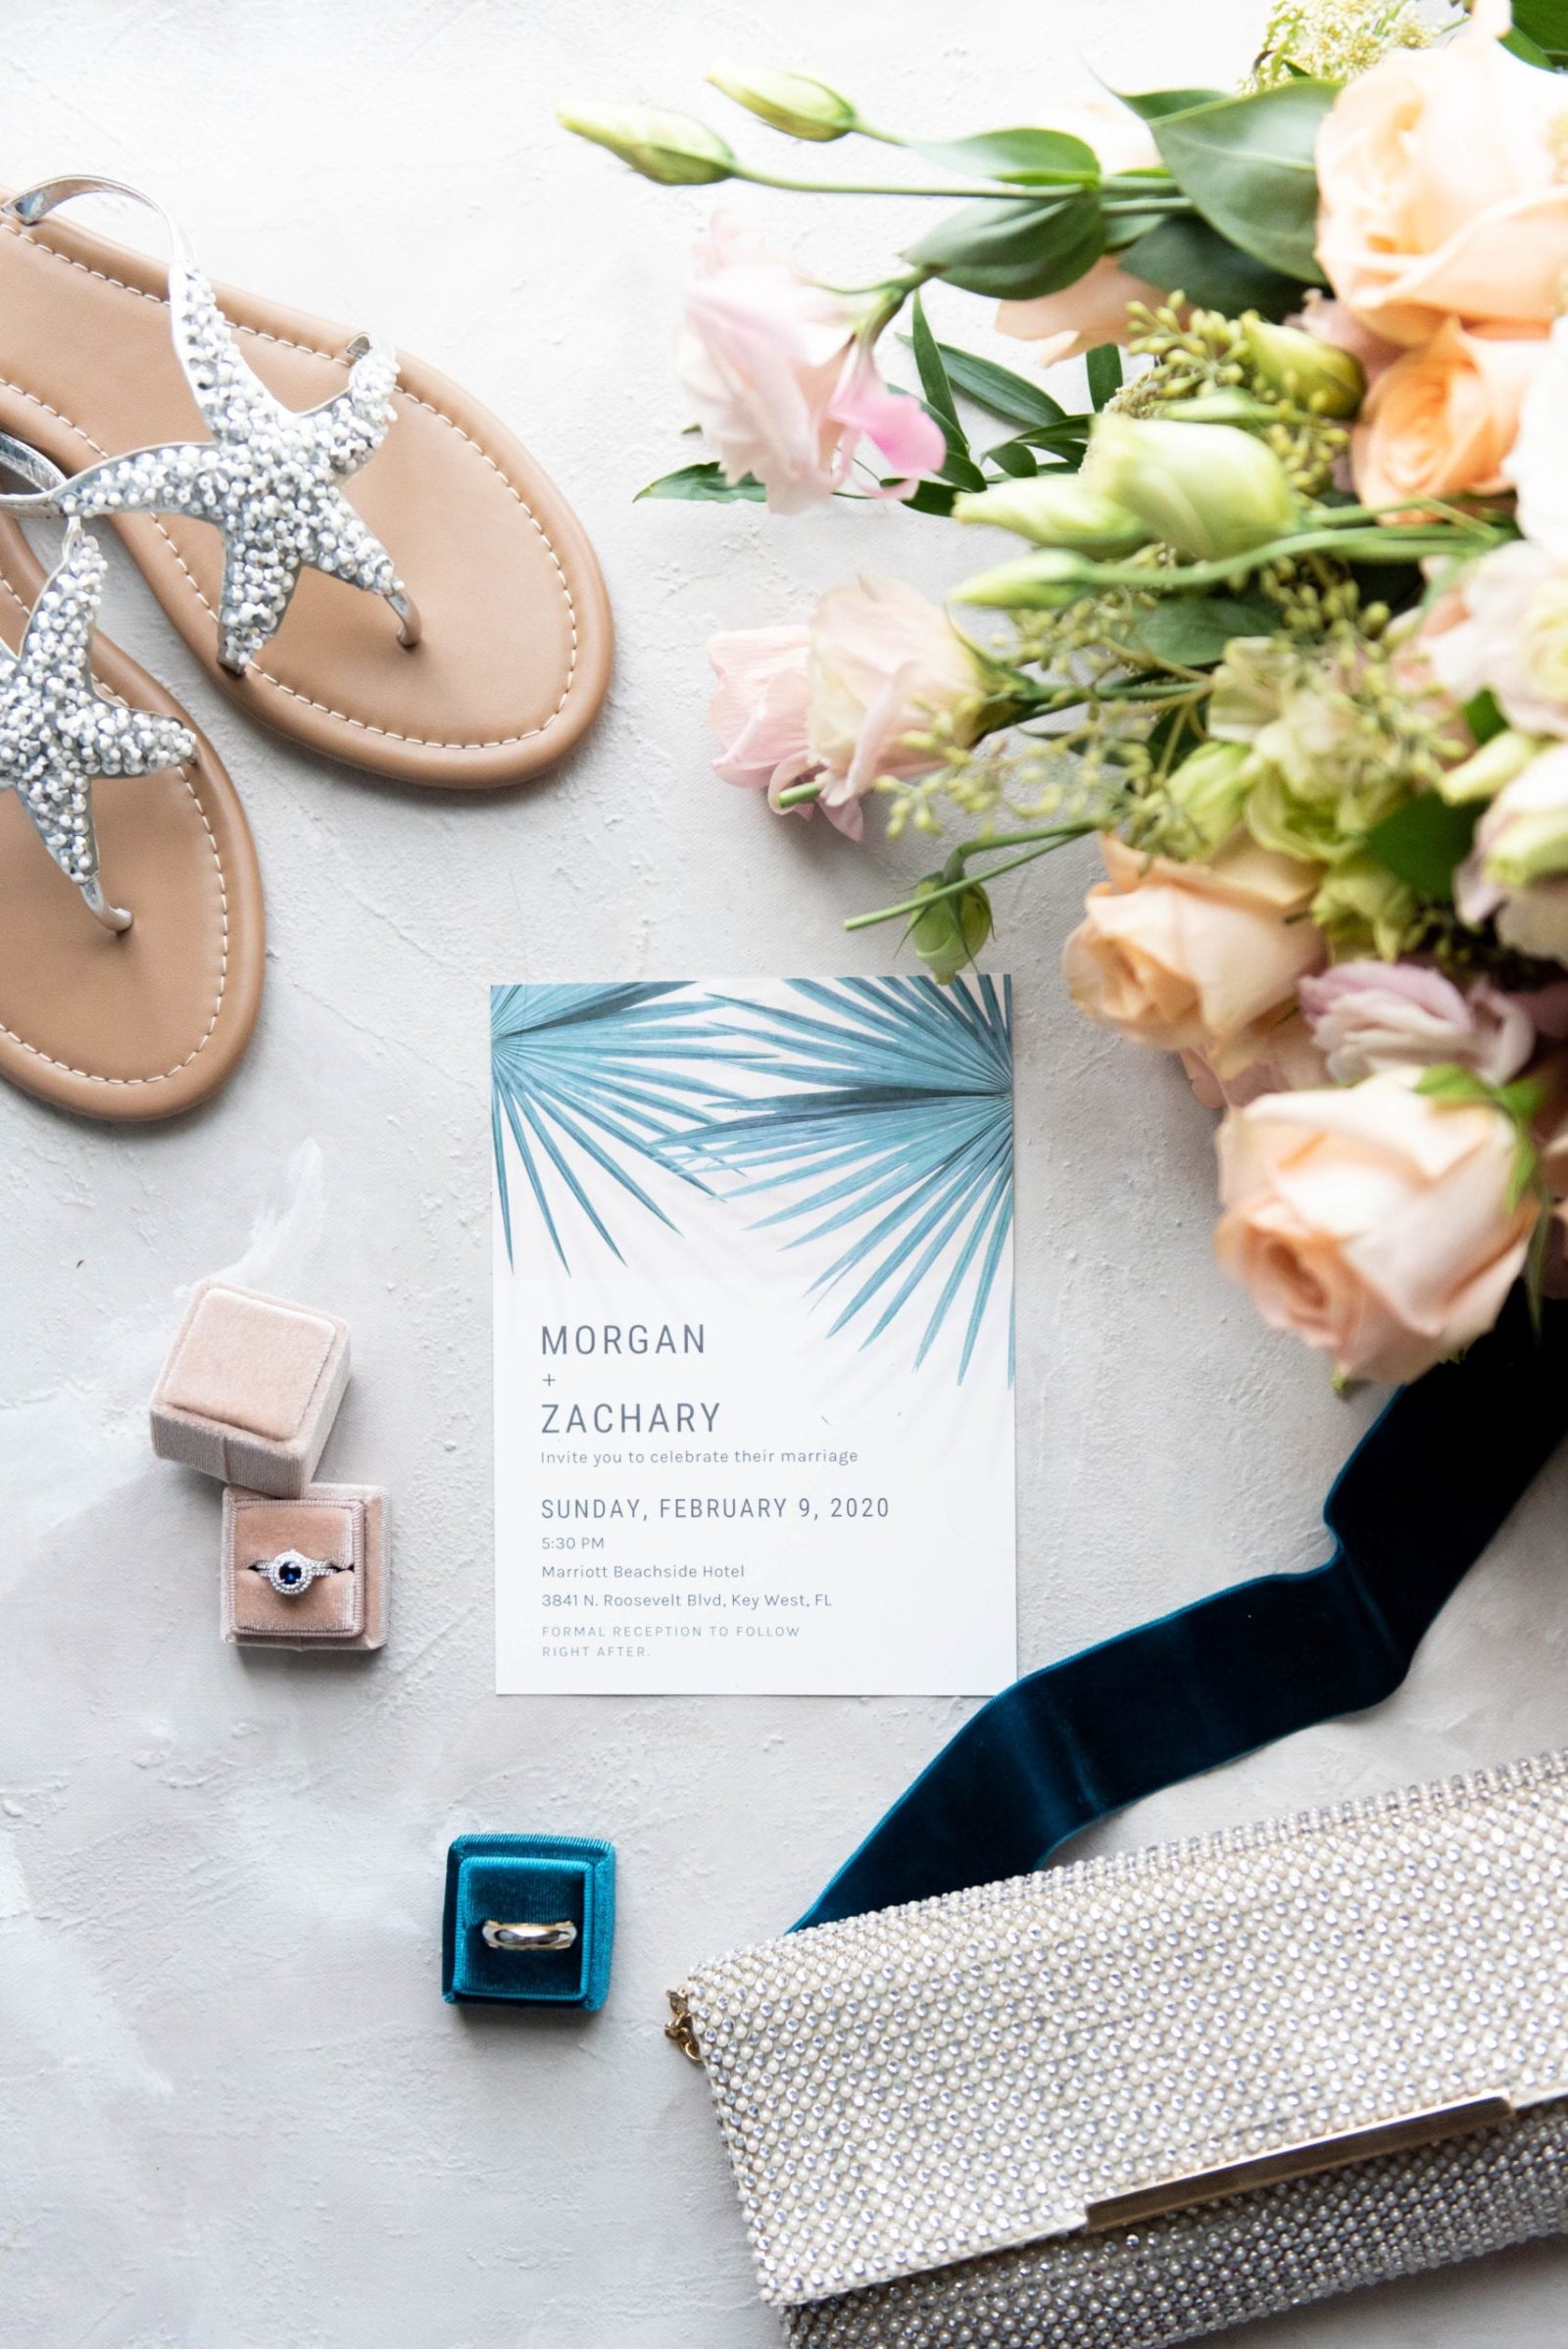 blush and teal wedding flatlay invitations wedding rings in mrs box flower bouquet and bride's shoes and purse